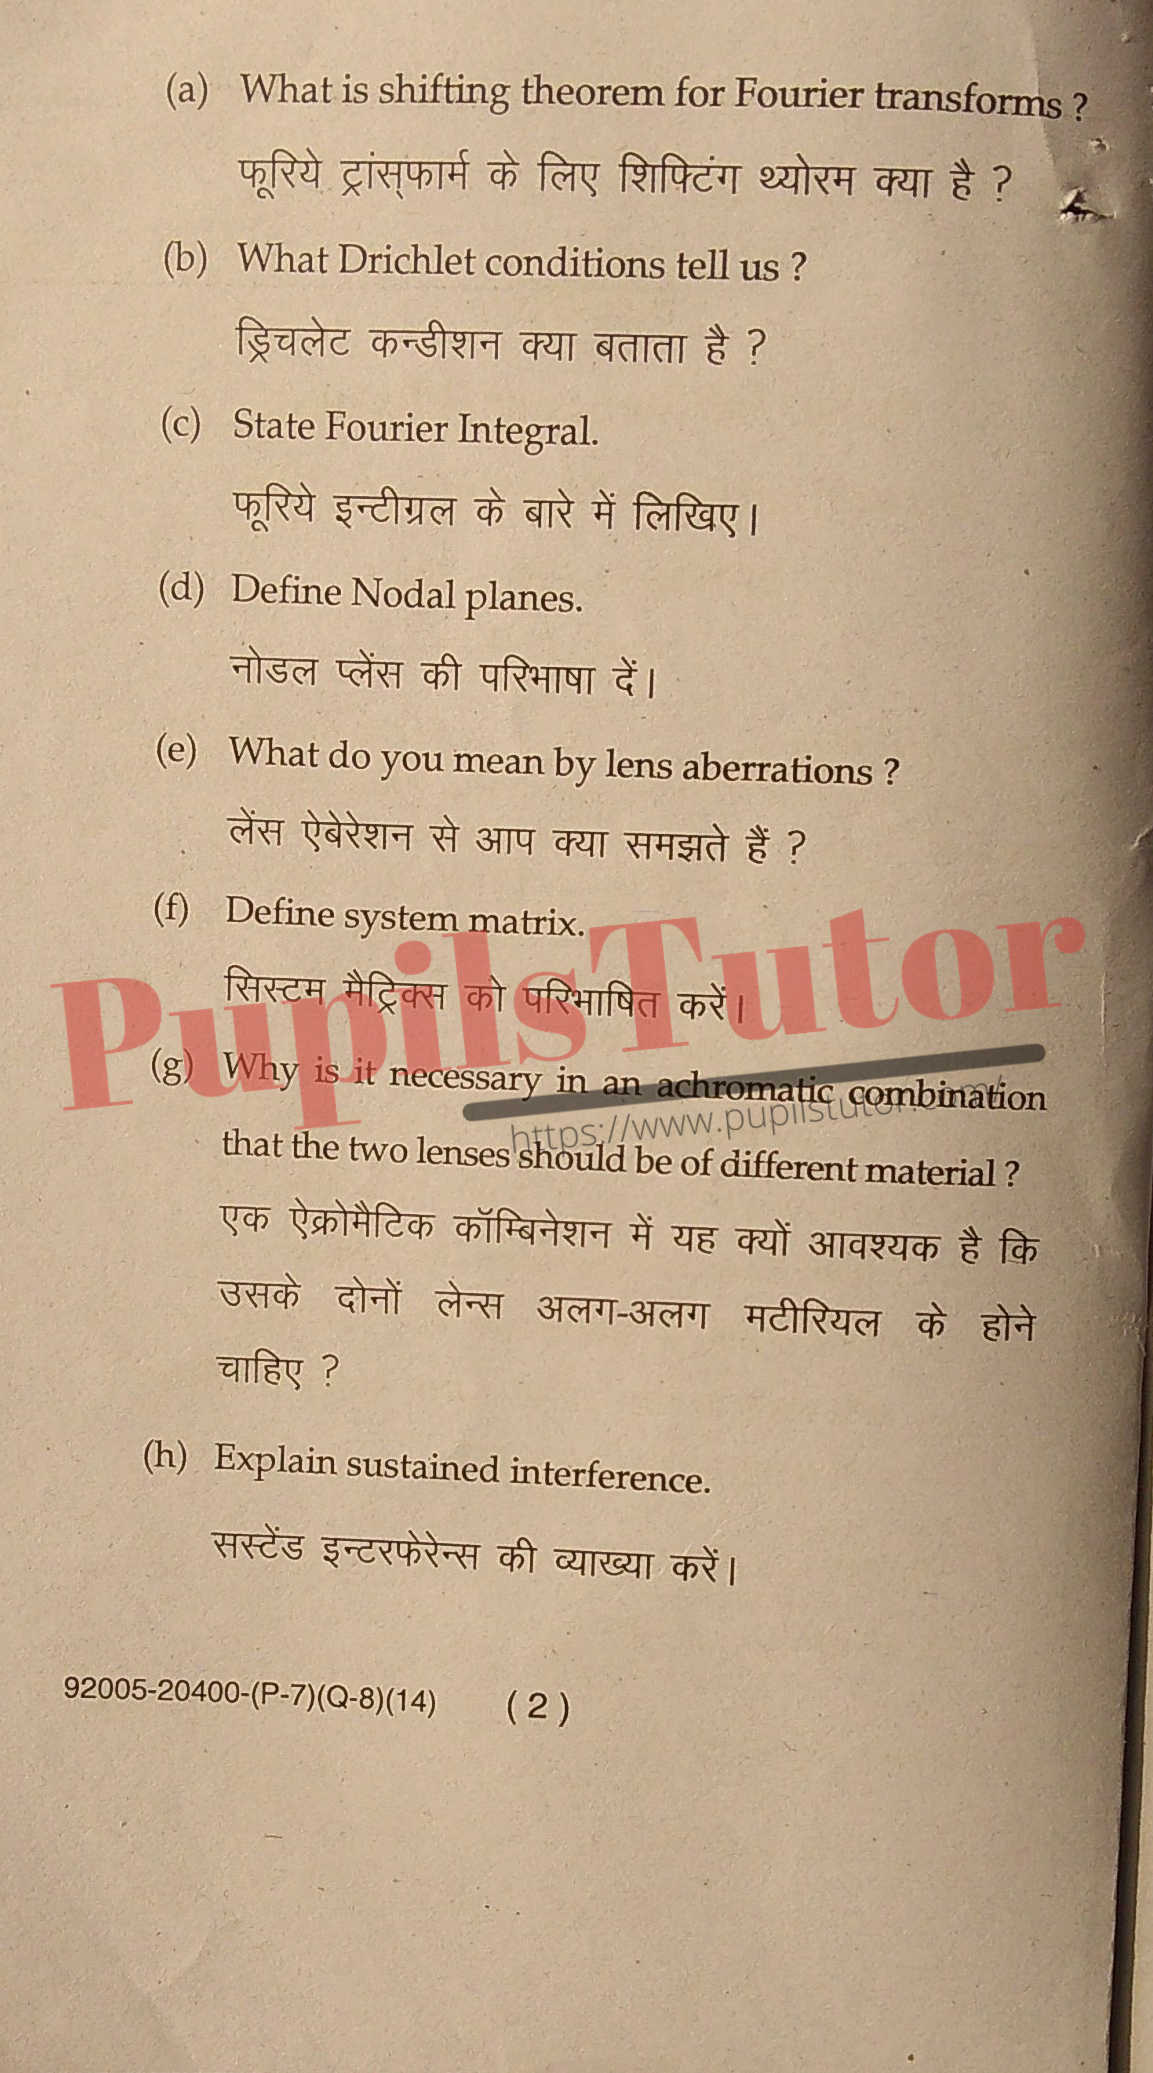 M.D. University B.Sc. [Physics] Optics - I Third Semester Important Question Answer And Solution - www.pupilstutor.com (Paper Page Number 2)